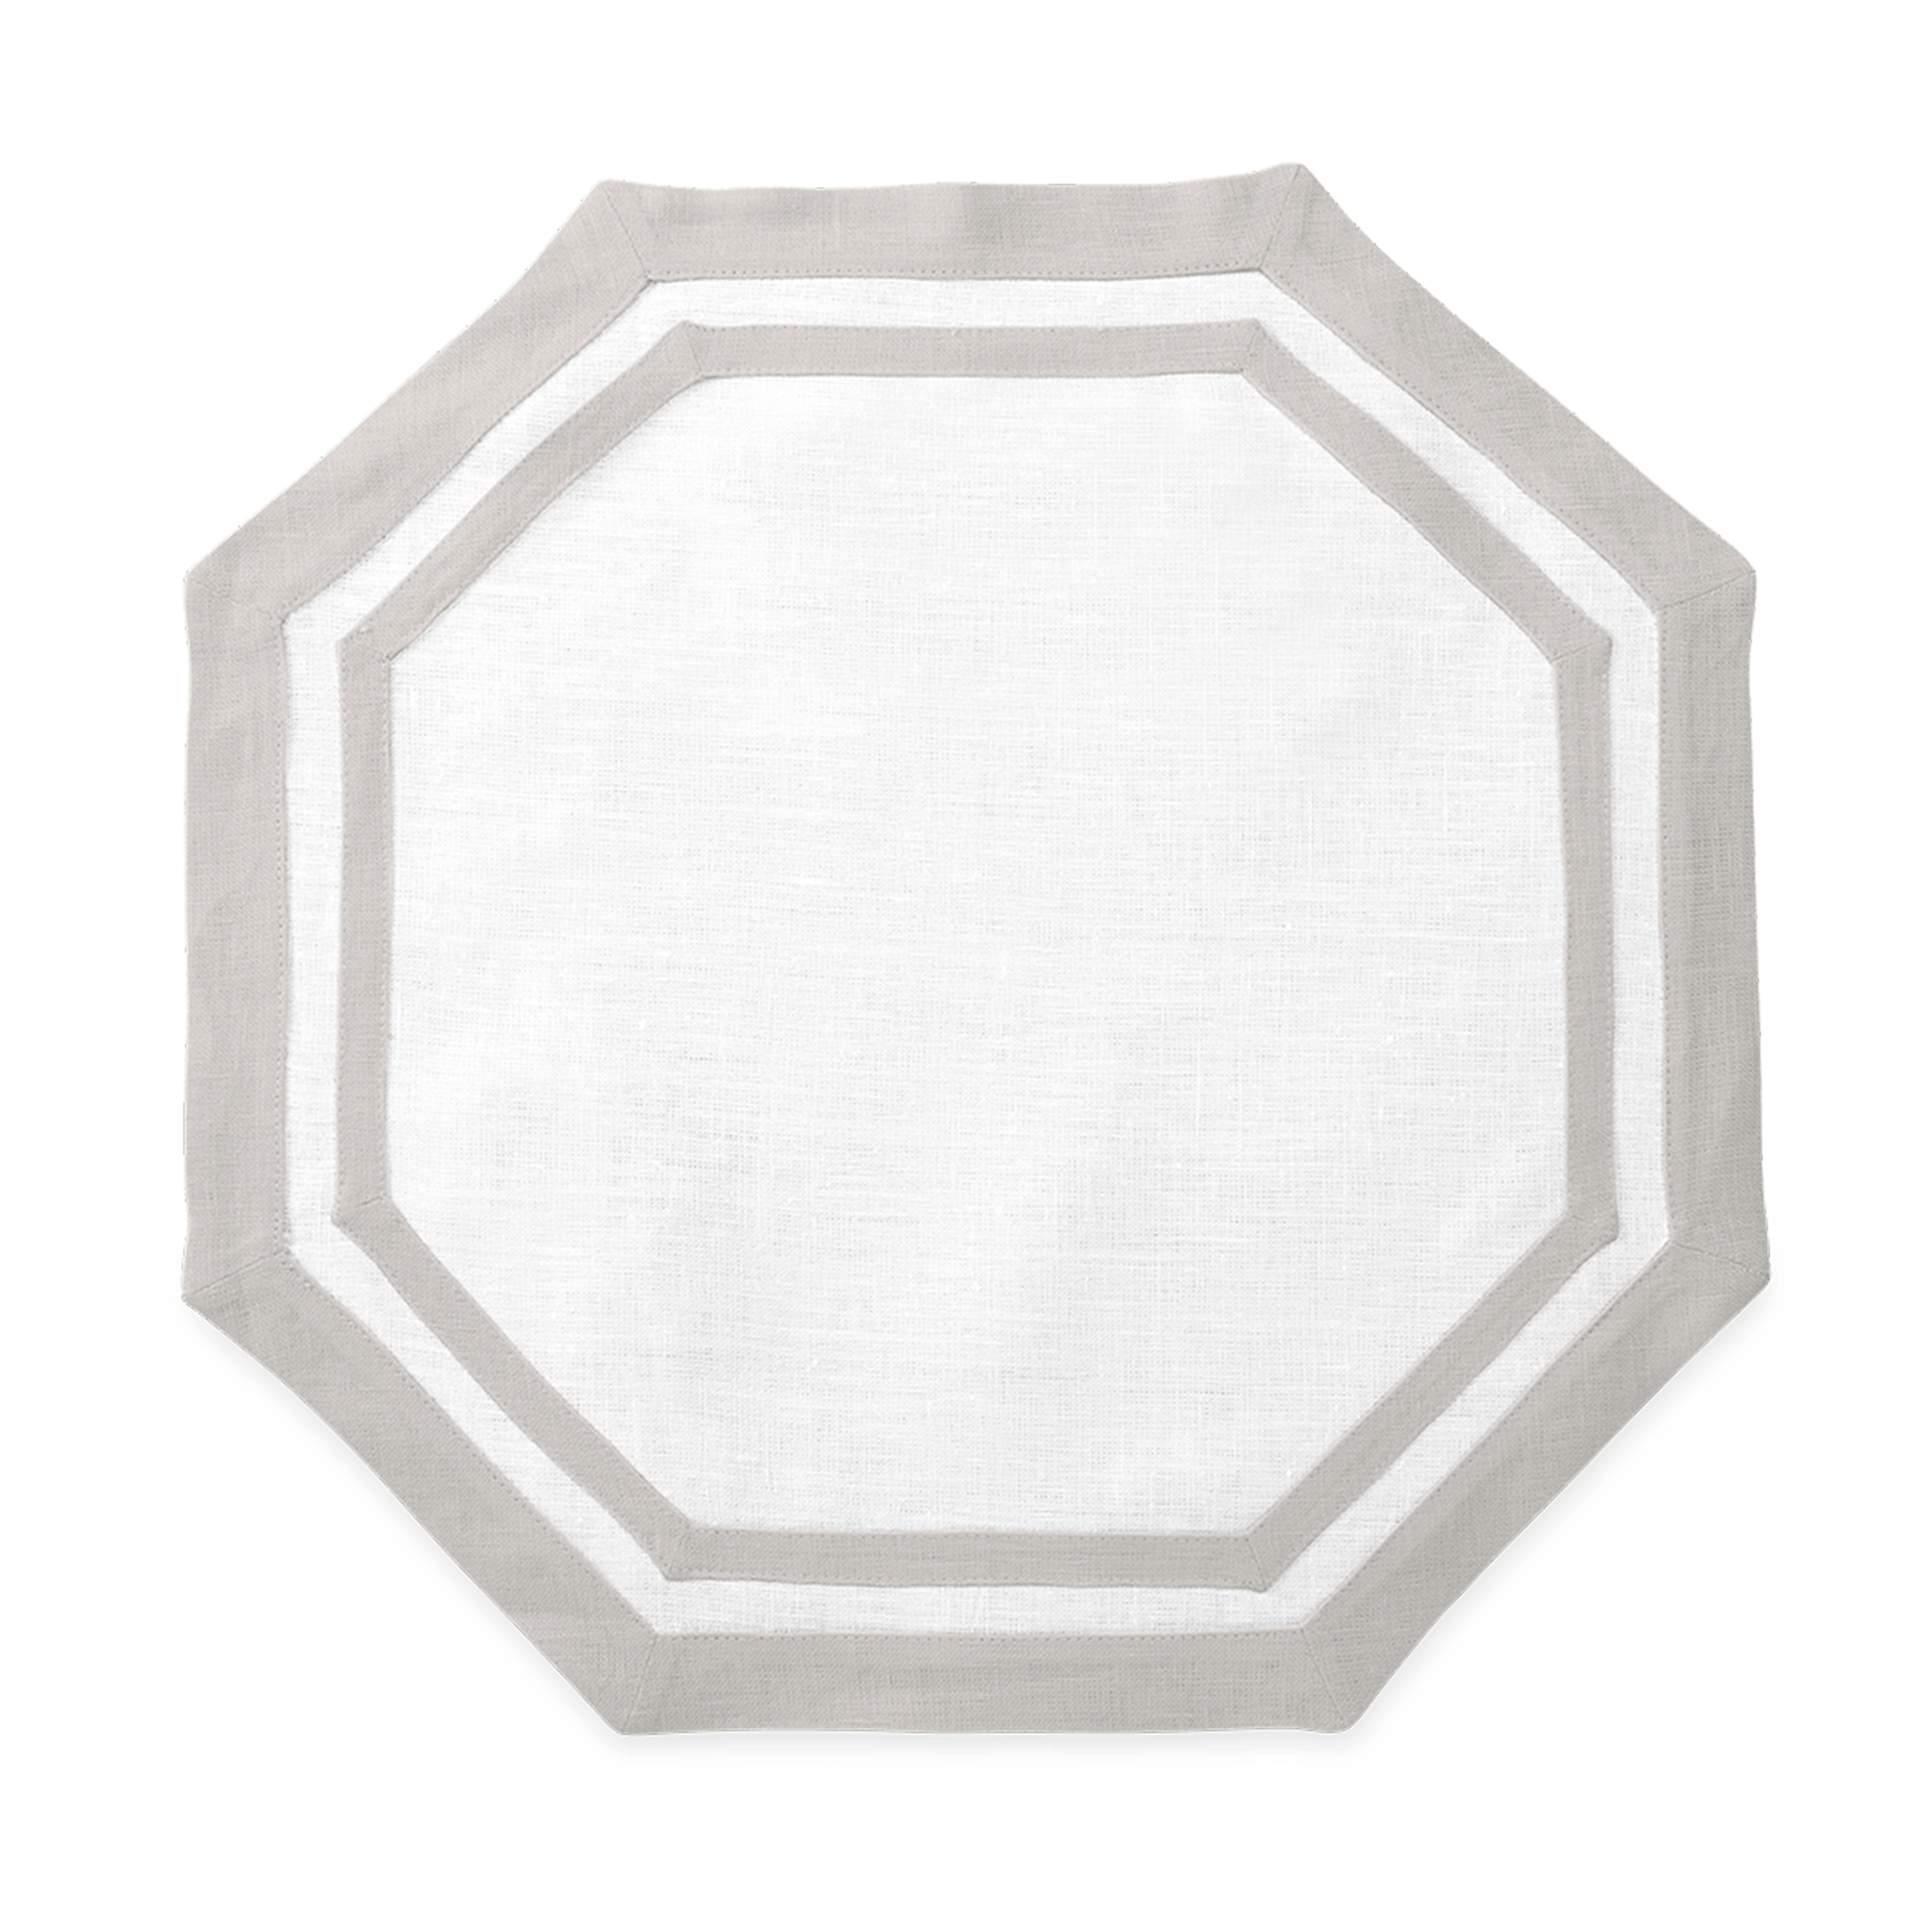 Silo Image of Matouk Double Border Octagon Placemat in Color Classic Grey